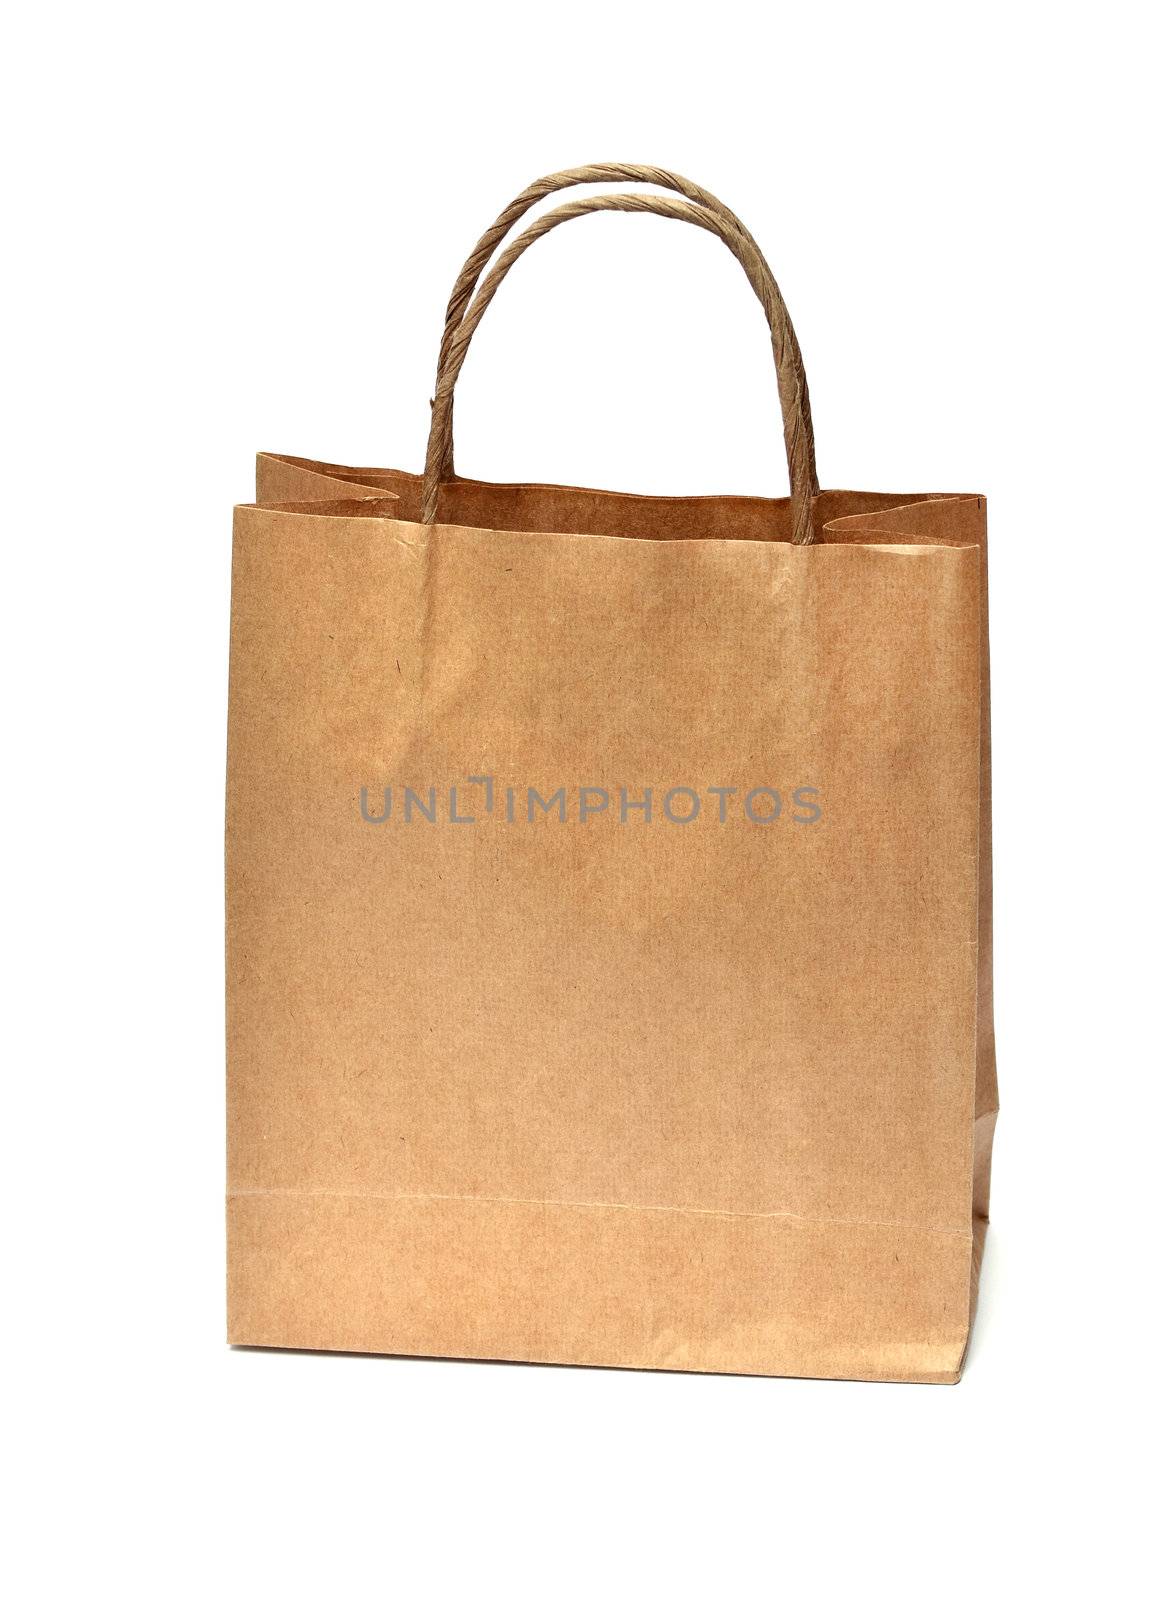 blank brown paper bag isolated on white background by DNKSTUDIO